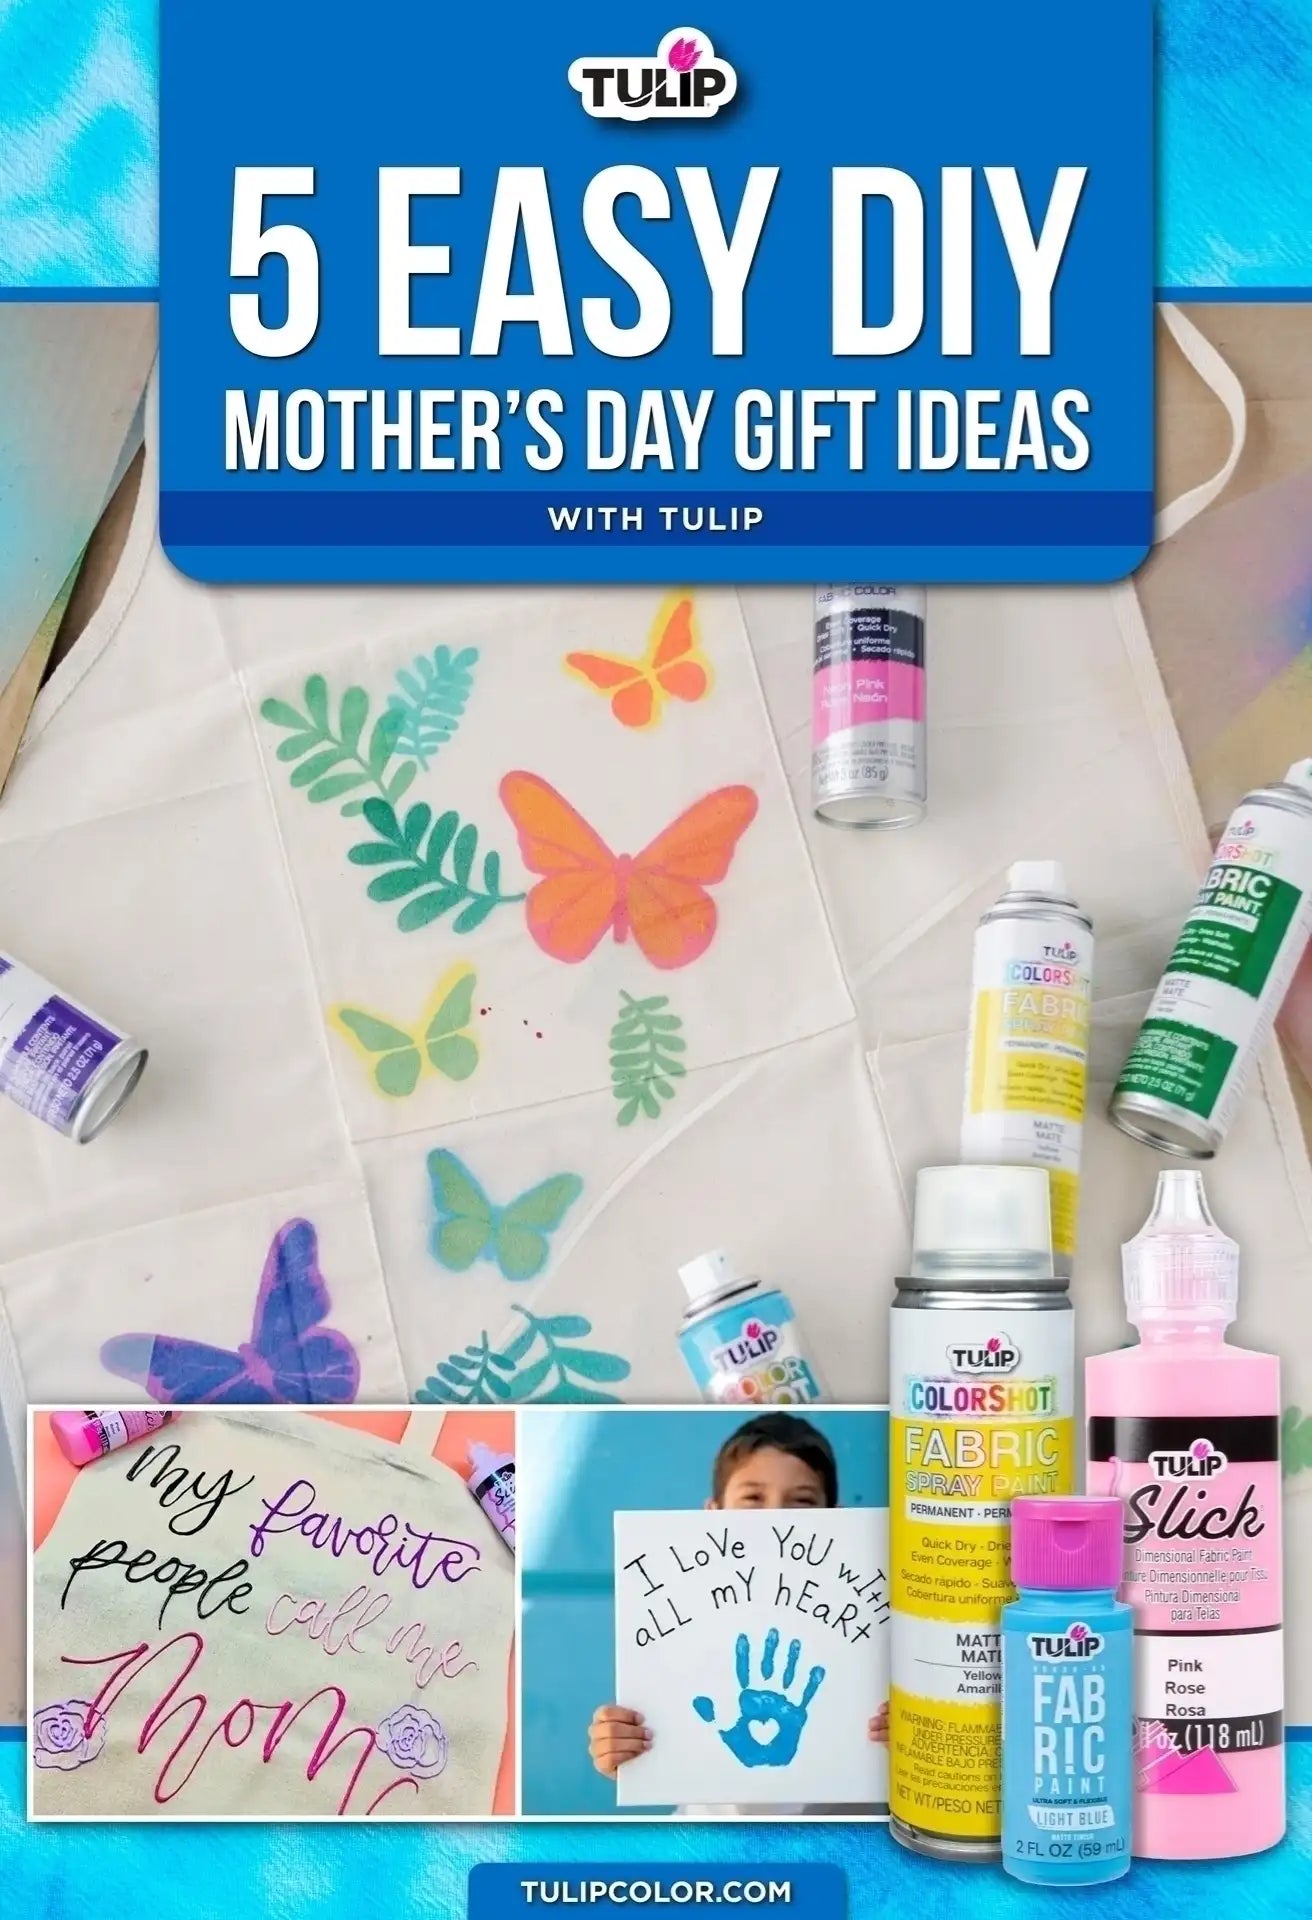 5 Easy DIY Mother’s Day Gift Ideas with Tulip